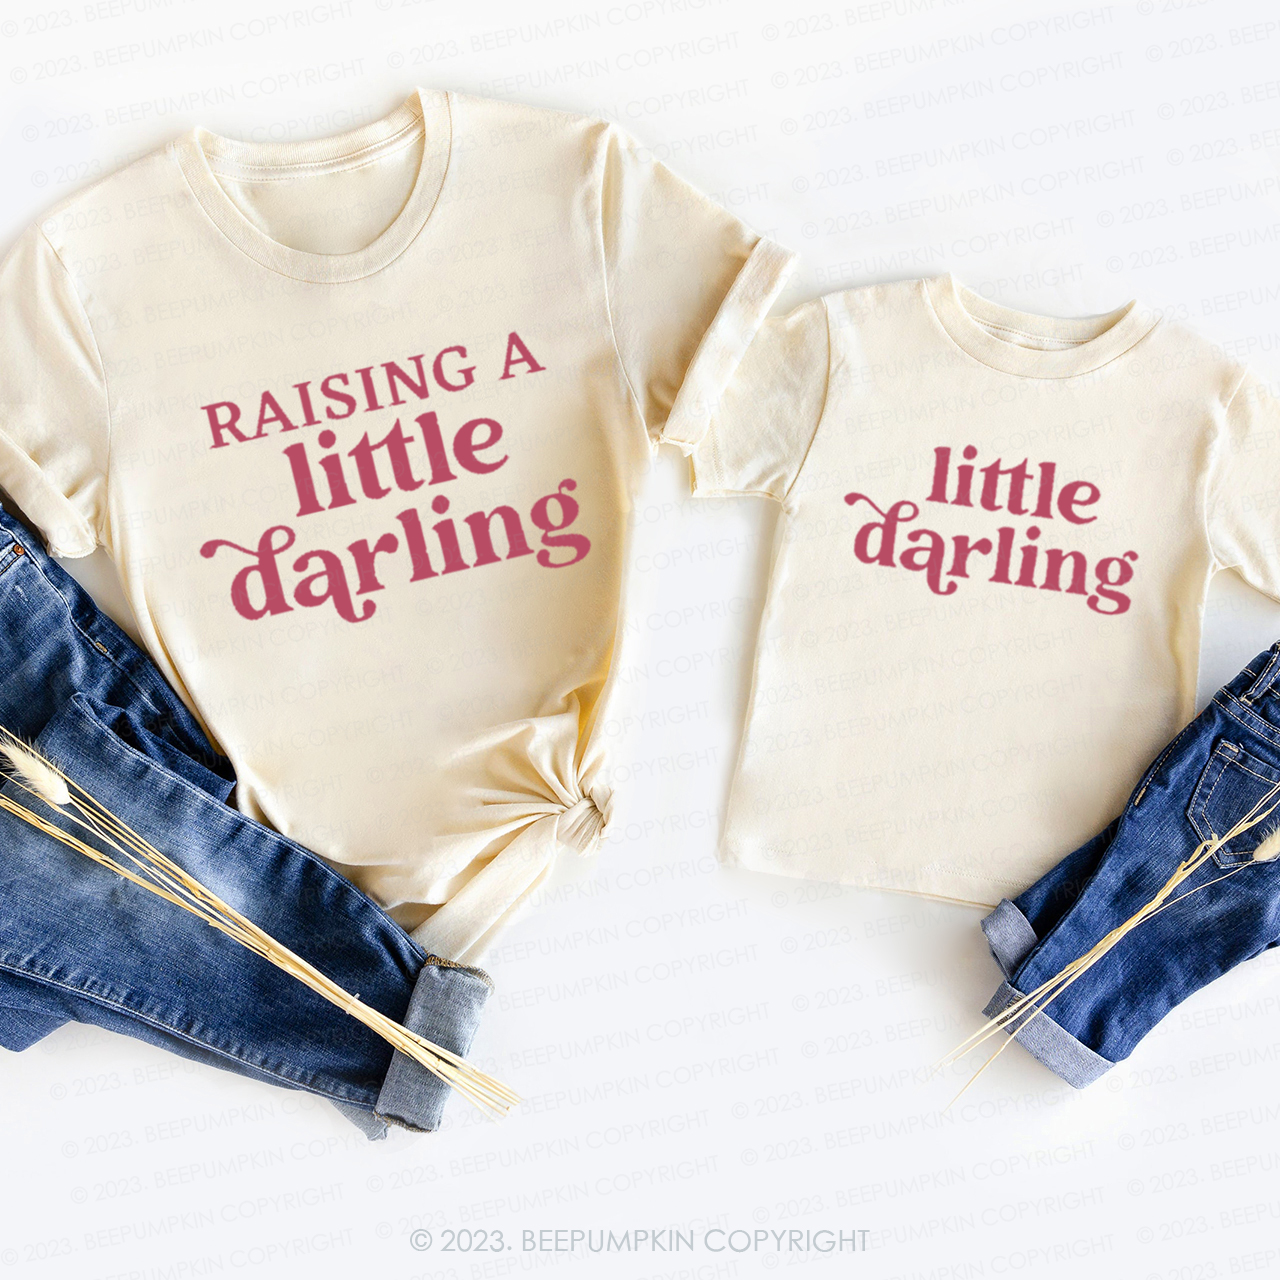 Raising A Little Darling T-Shirts For Mom&Me